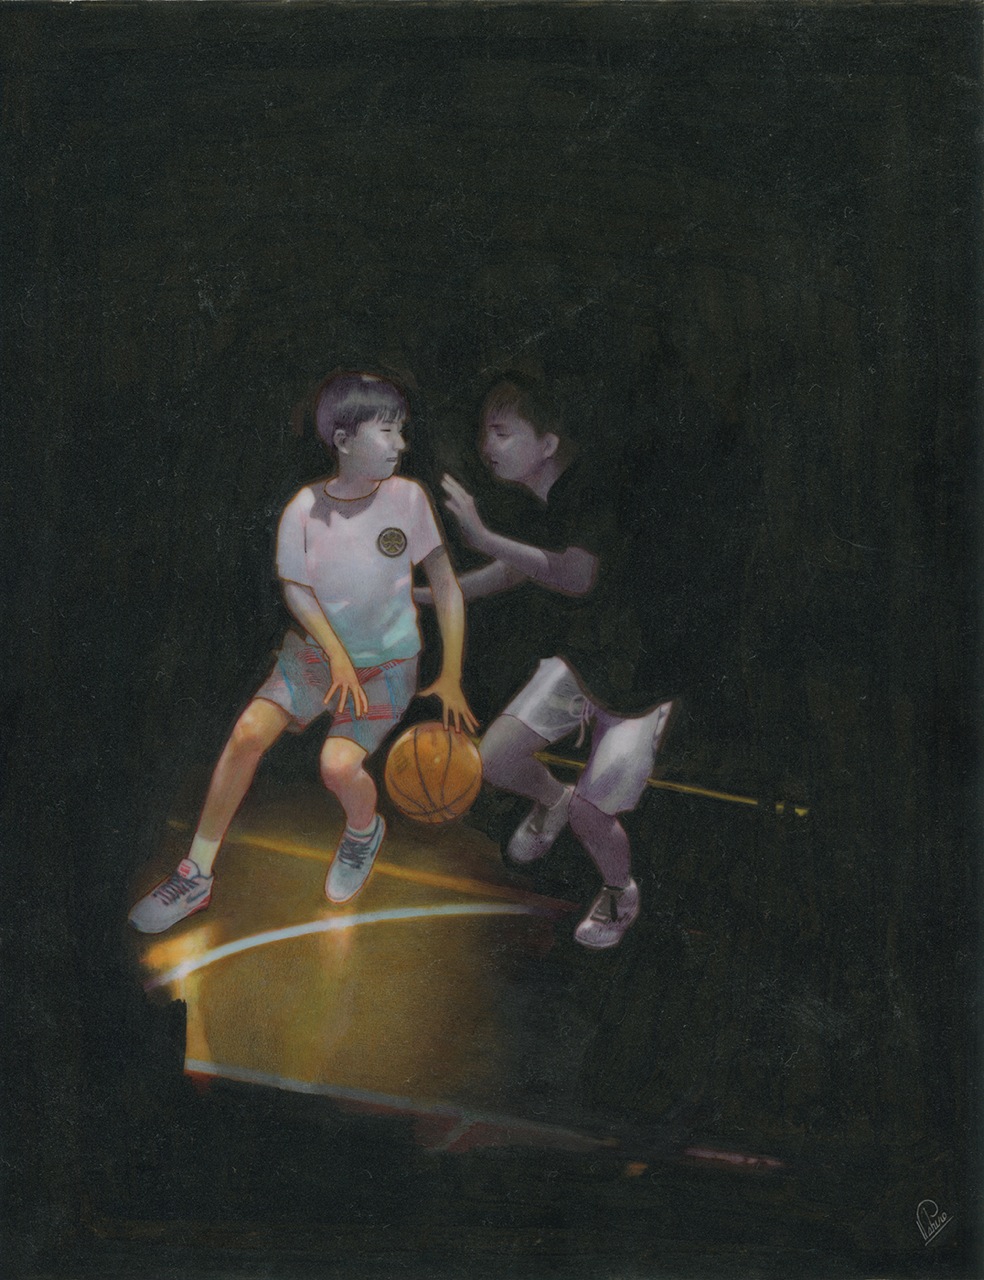 EDWIN USHIRO It takes Great Strength to Stay in the Game (2015)